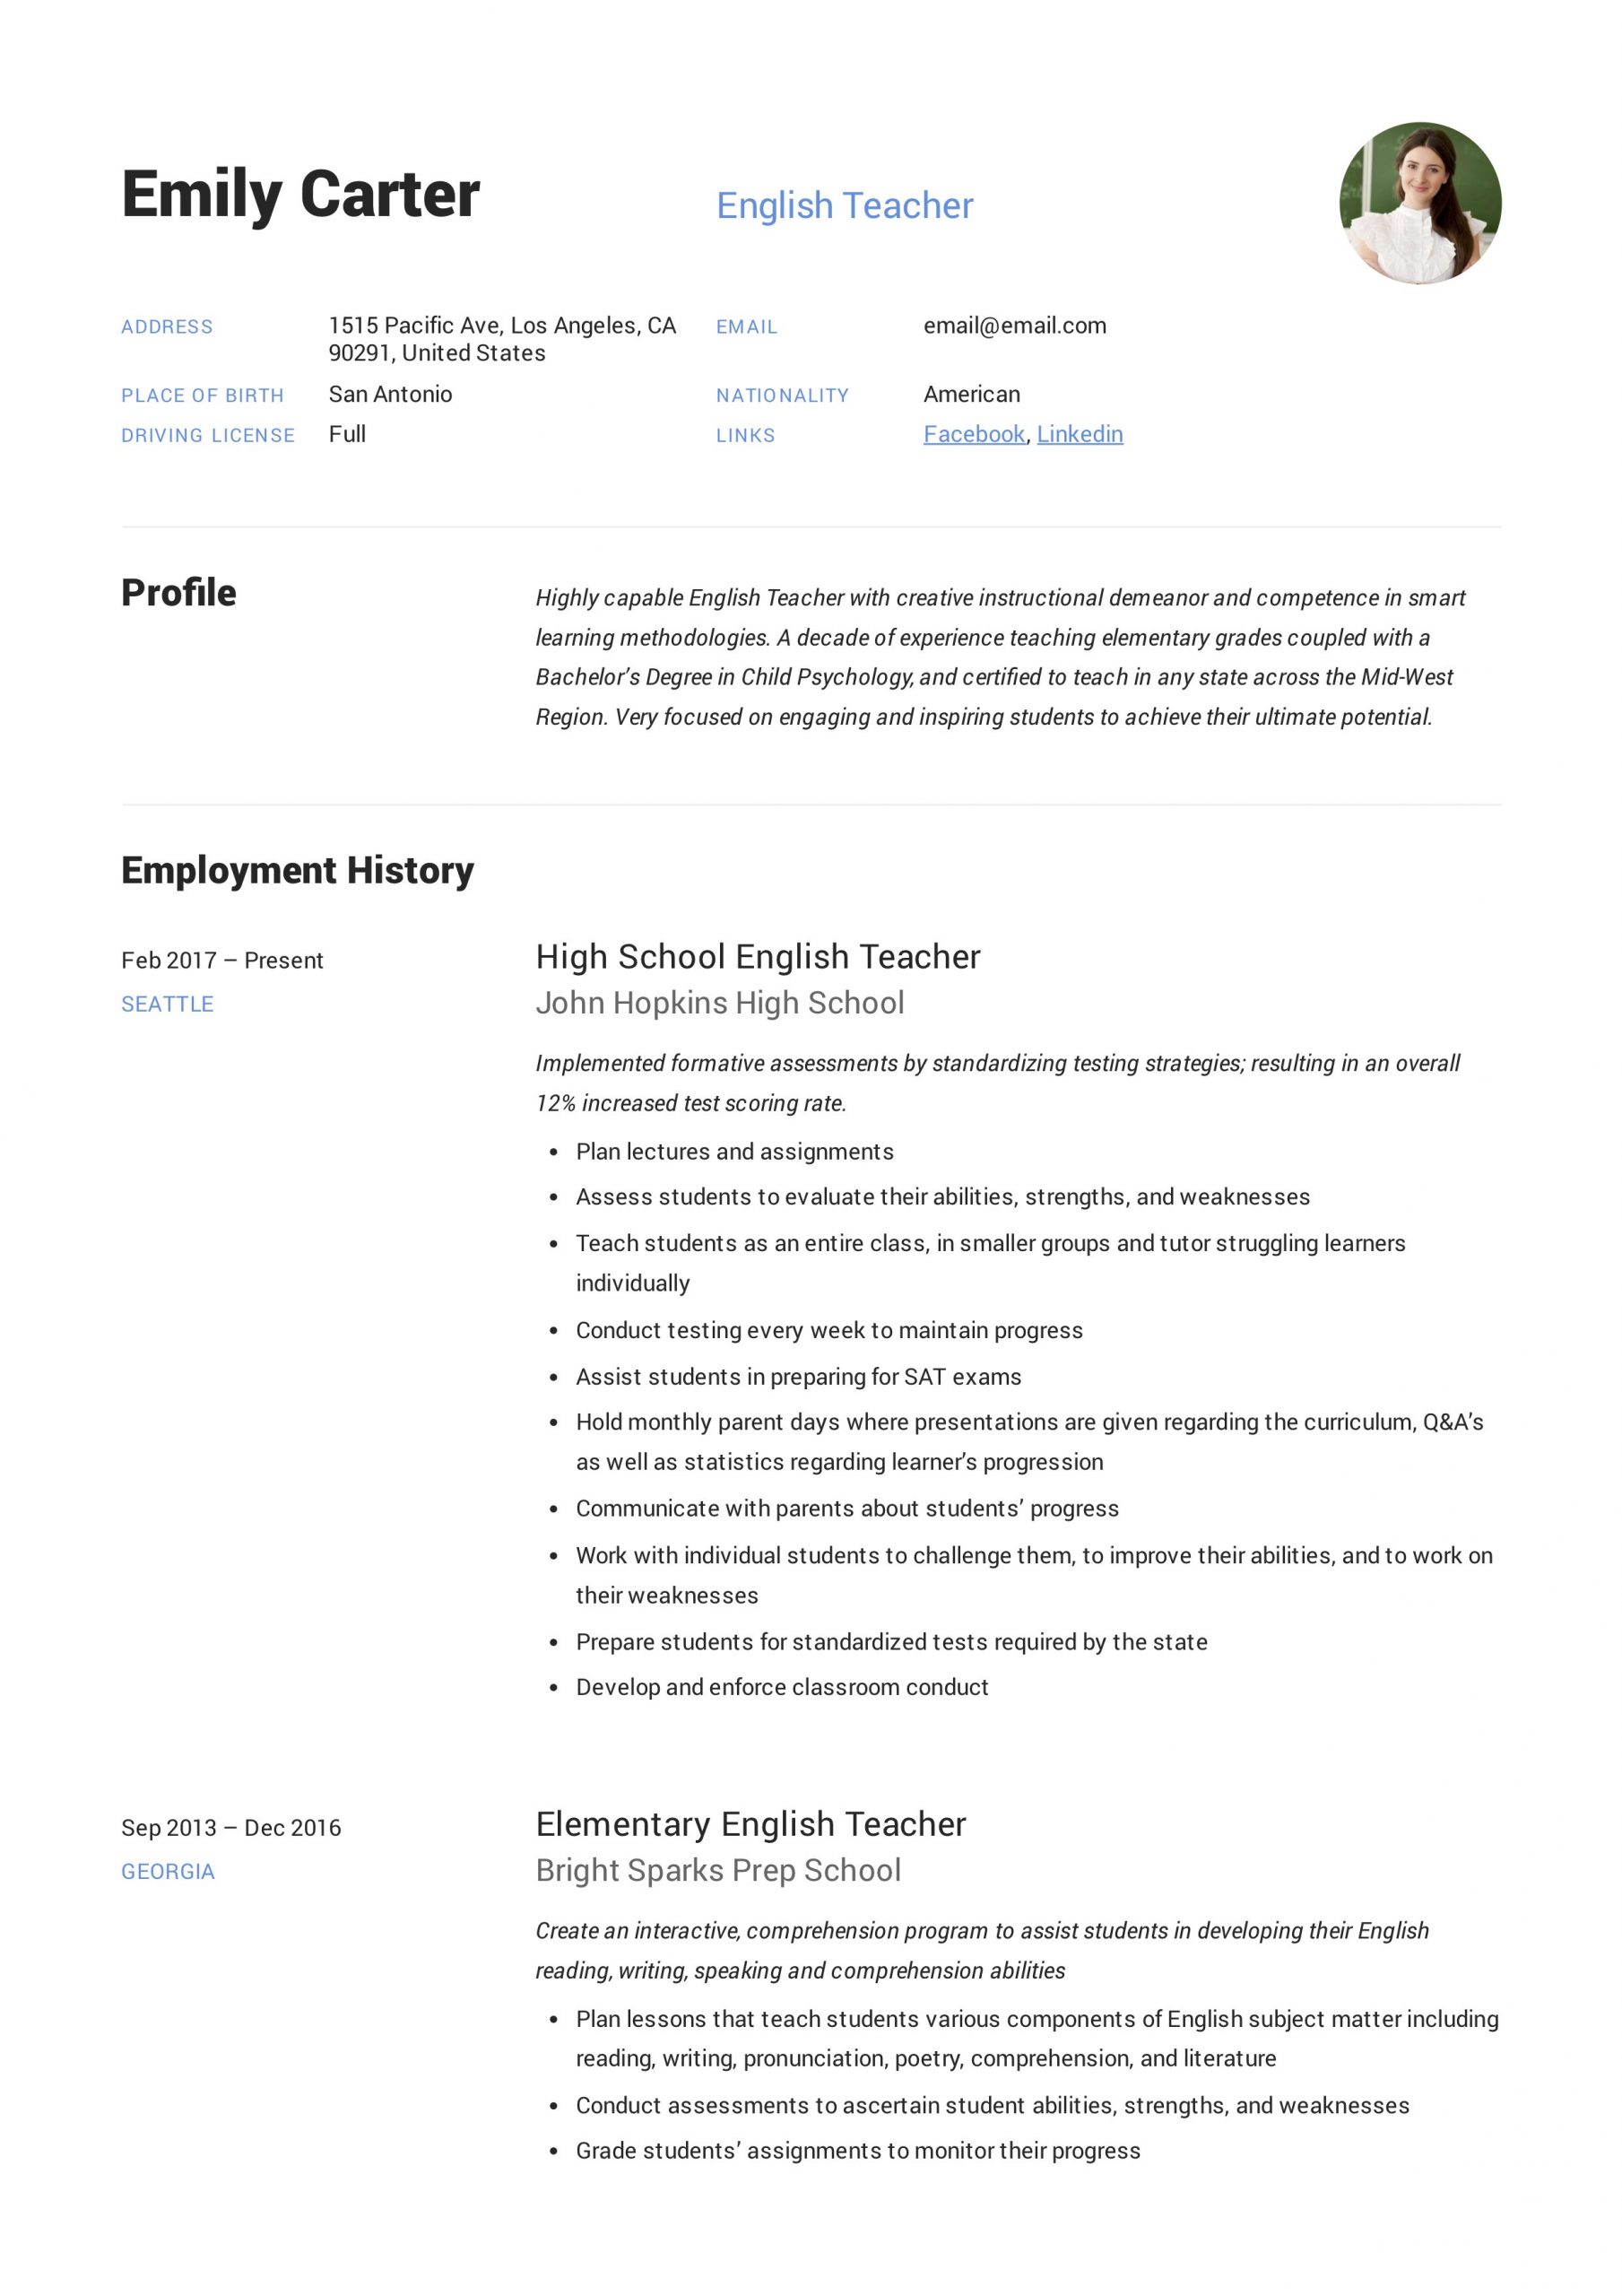 Sample Resume for School Principal Position In India English Teacher Resume & Writing Guide  12 Free Templates 2020